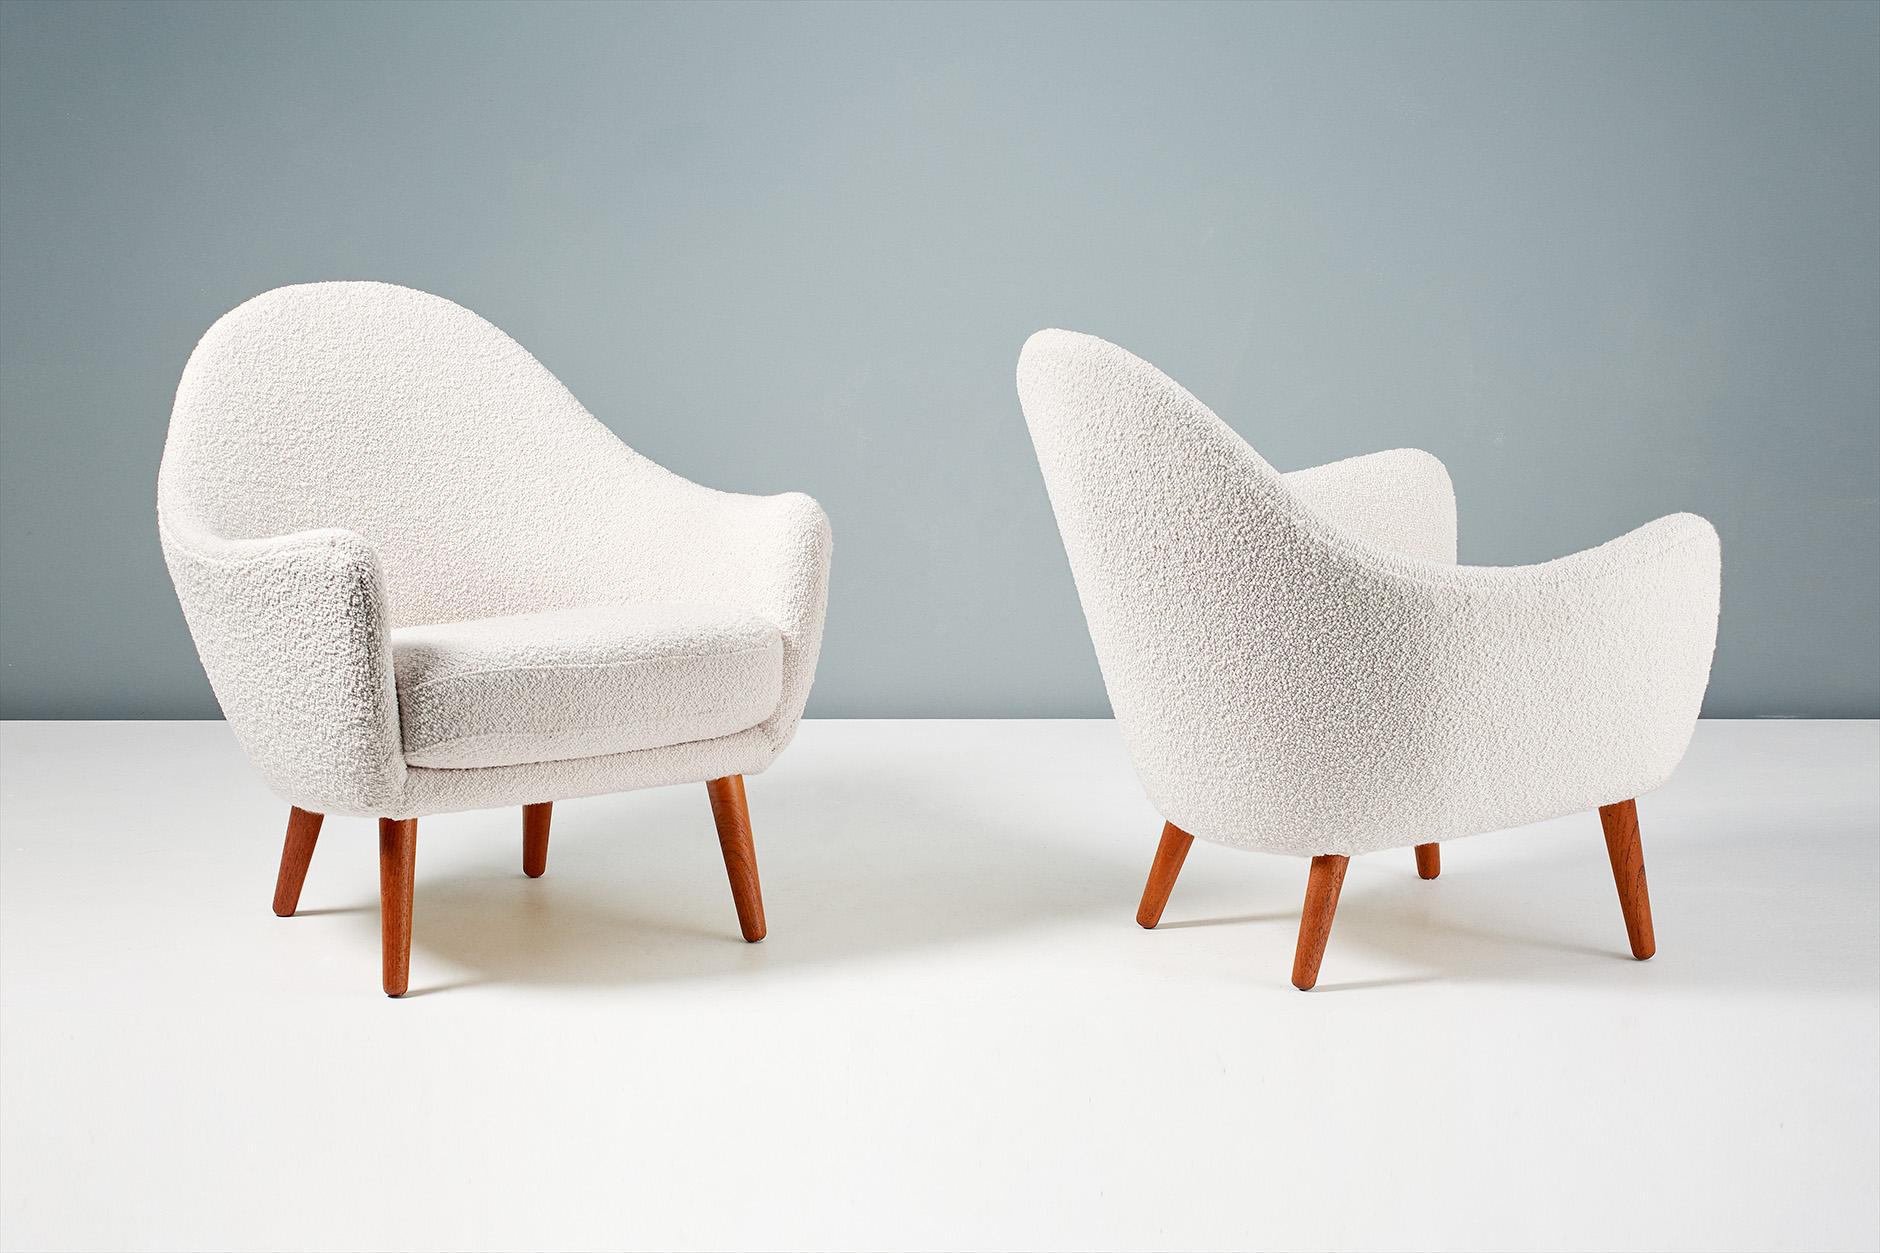 Ib Kofod-Larsen 
Lounge chairs, 1960s

Lounge chairs attributed to Ib Kofod-Larsen, circa 1960s, Denmark. Turned teak legs with seats and sprung cushions reupholstered in luxurious Dedar bouclé wool fabric.